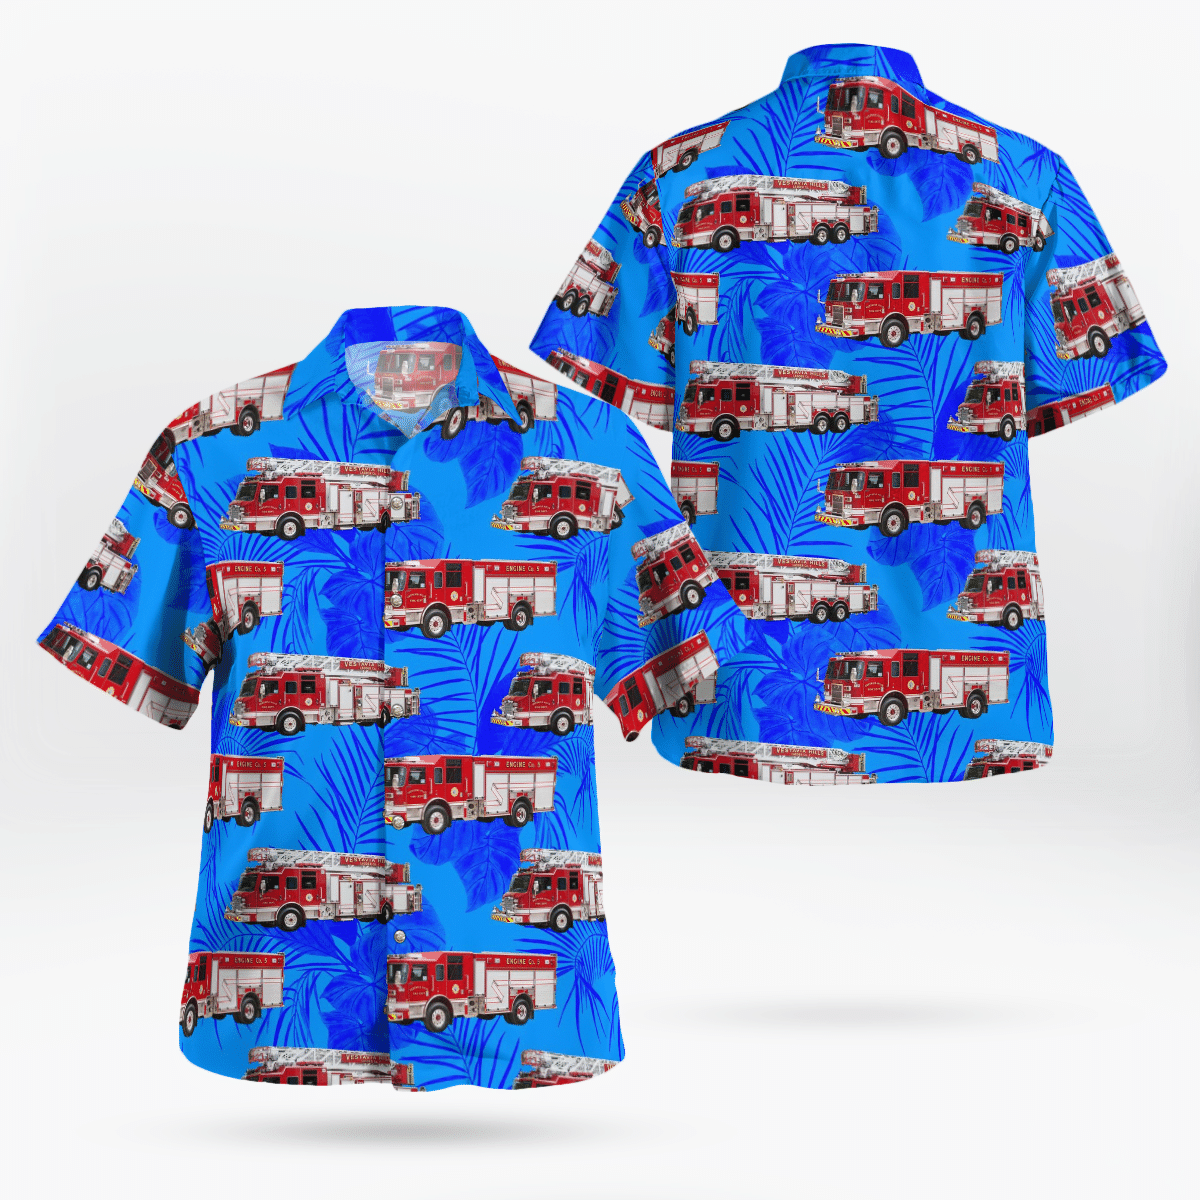 If you want to be noticed, wear These Trendy Hawaiian Shirt 134